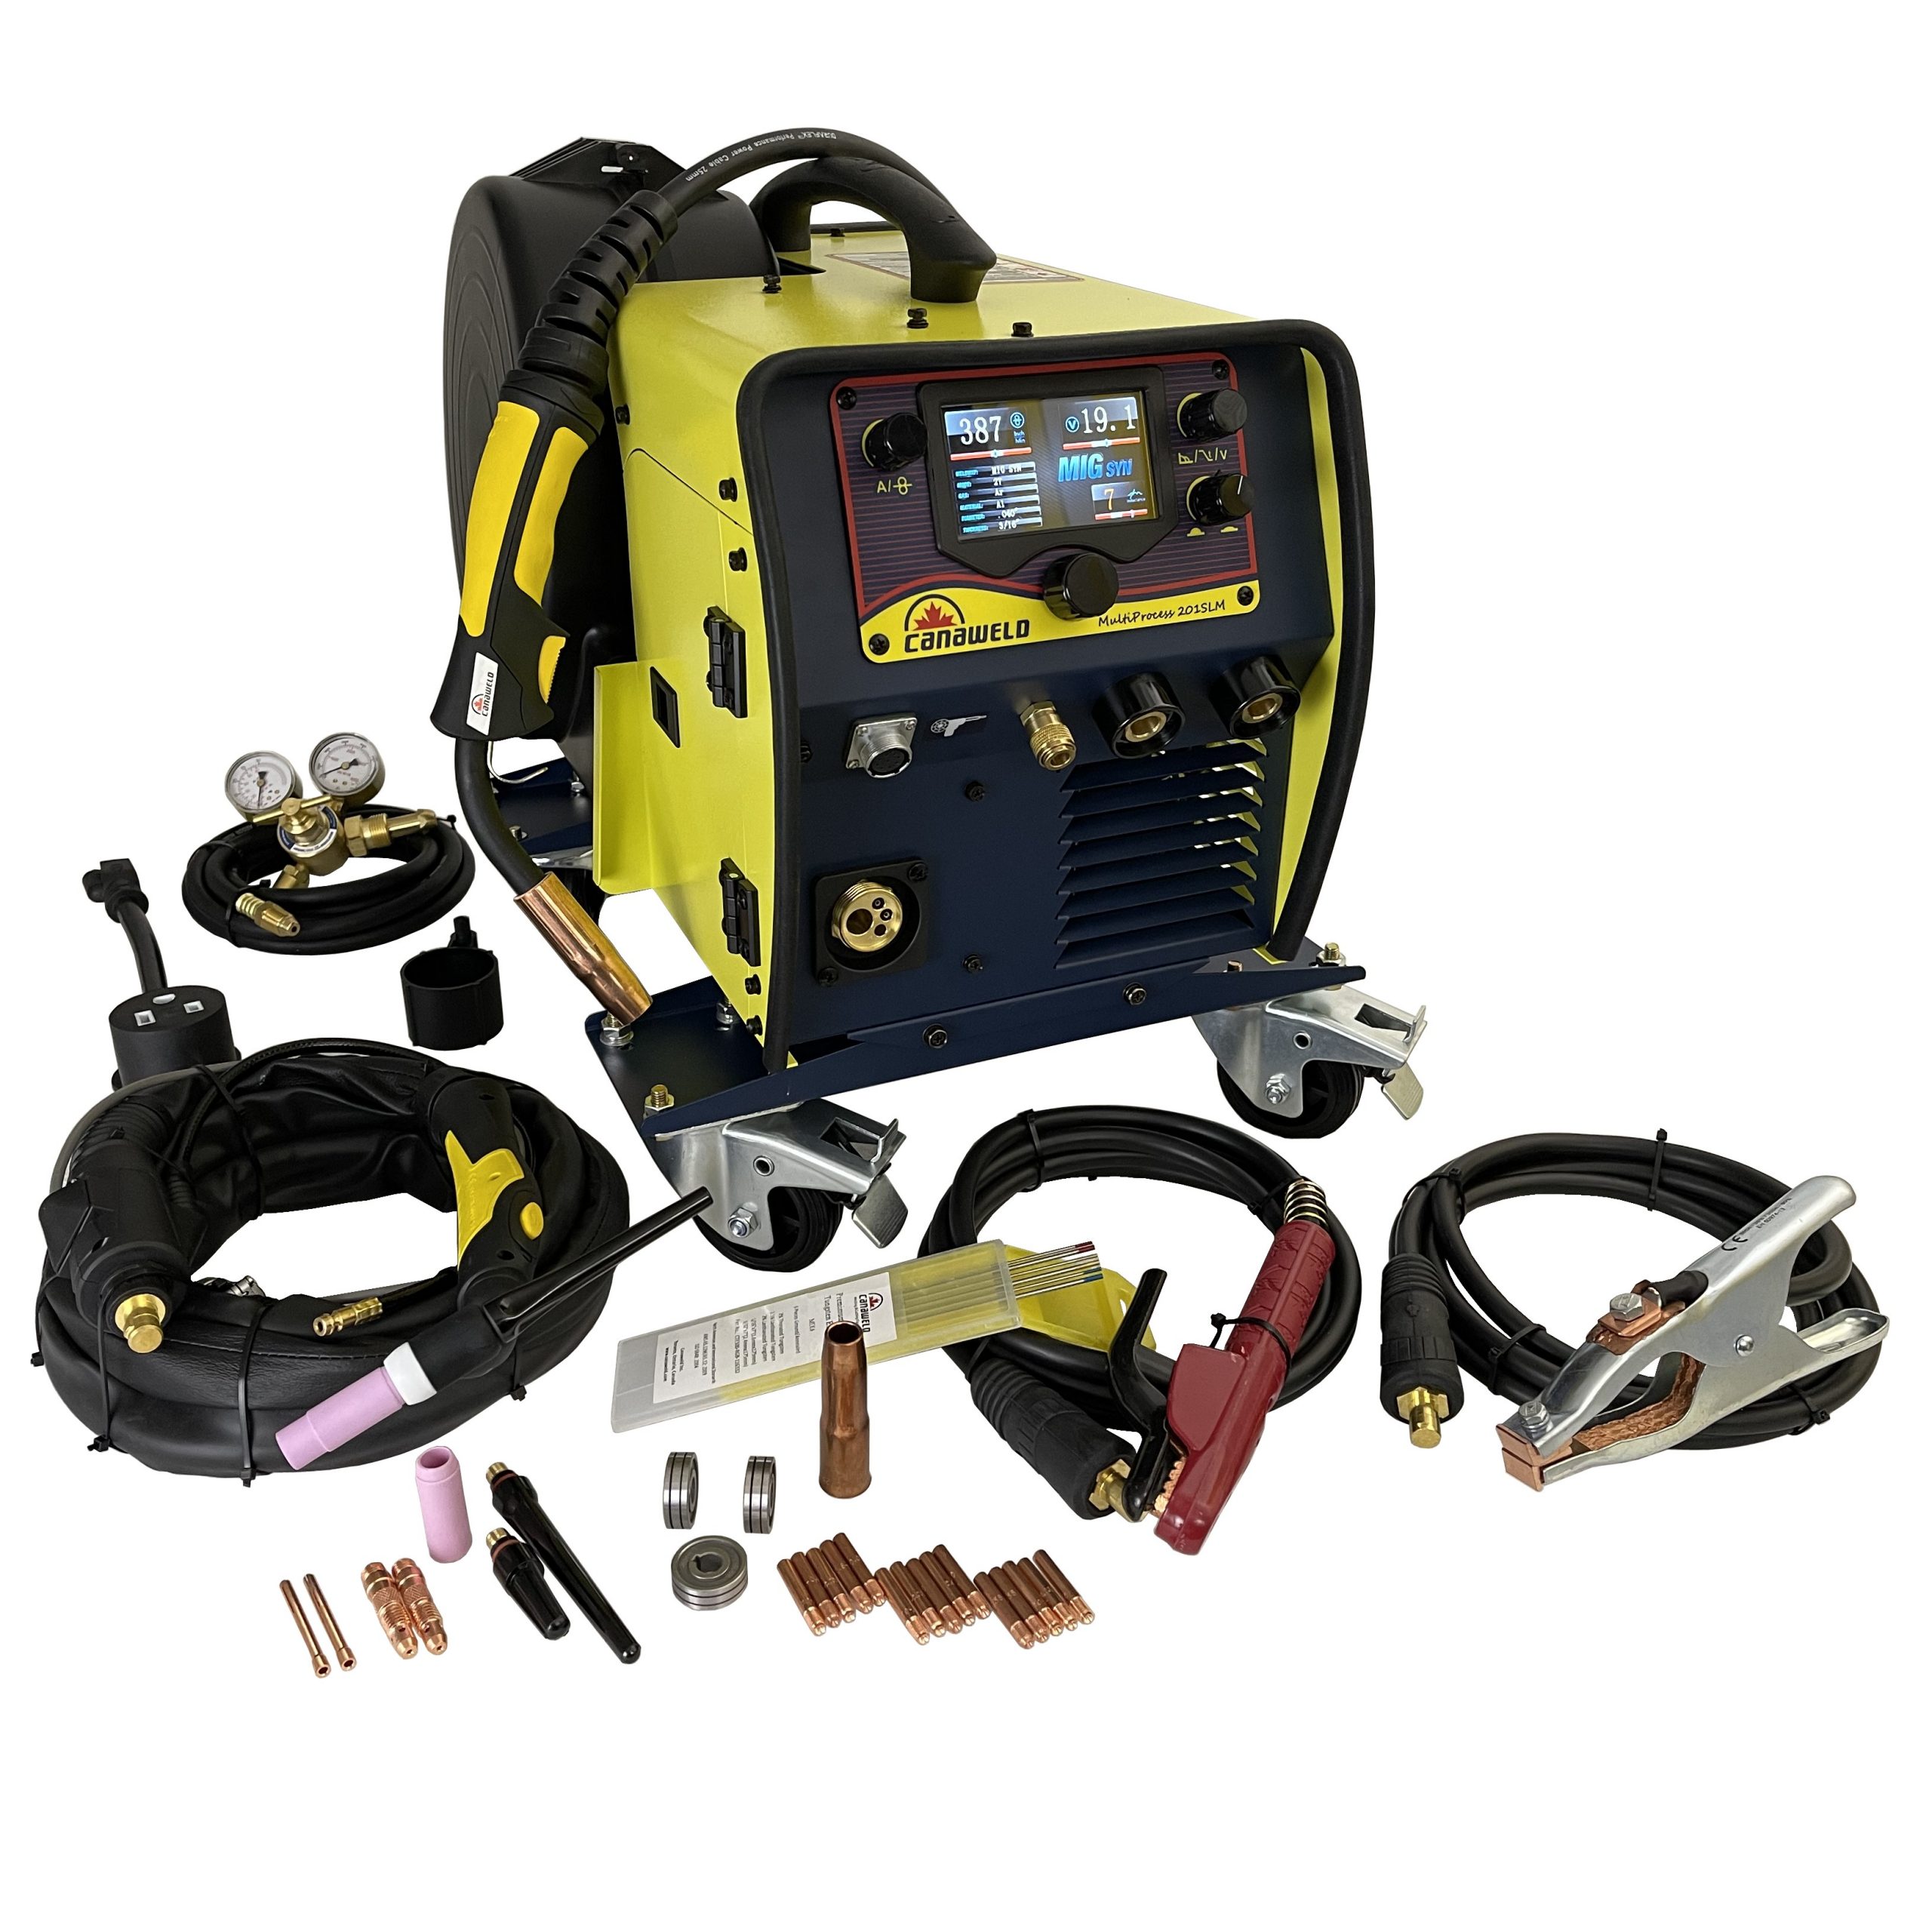 Selectable between 110-220 V 3 year Warranty CANAWELD MIG TIG Stick Welder MADE IN CANADA Multi Process 201 SLM All-in-one Portable Welding Machine SLM Gold 